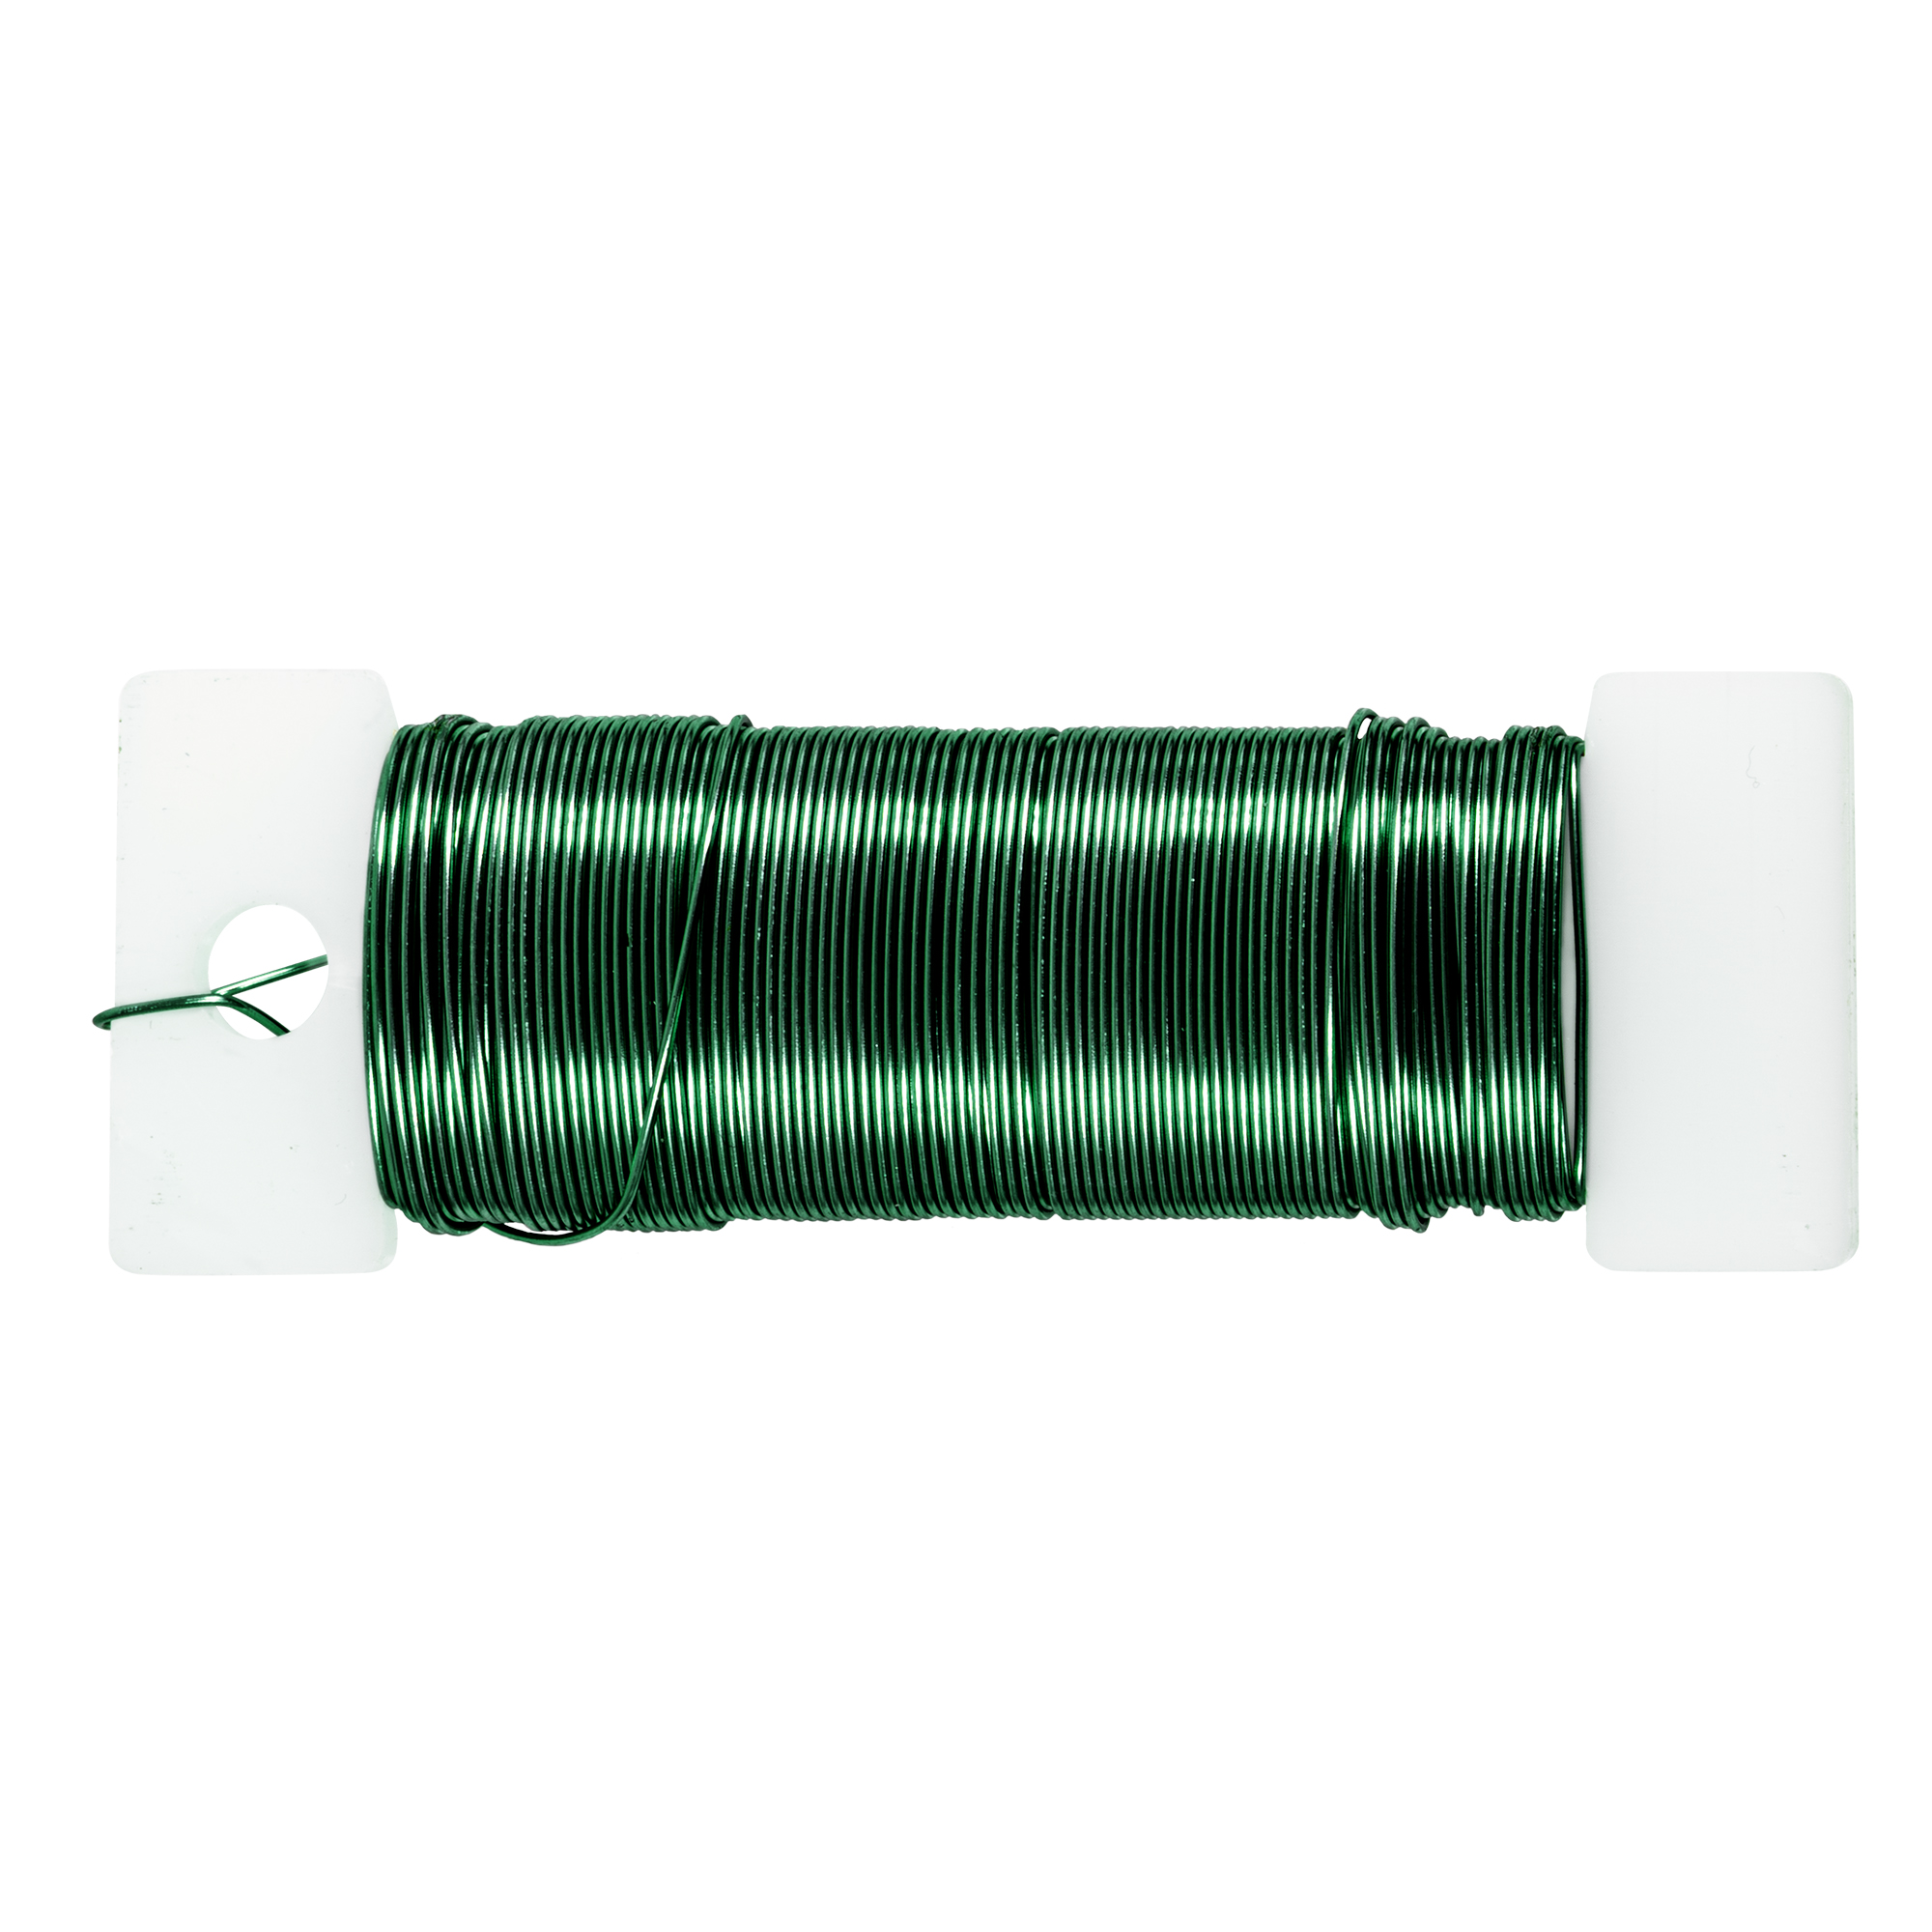 24 Gauge Floral Wire 115ft/Roll - Green